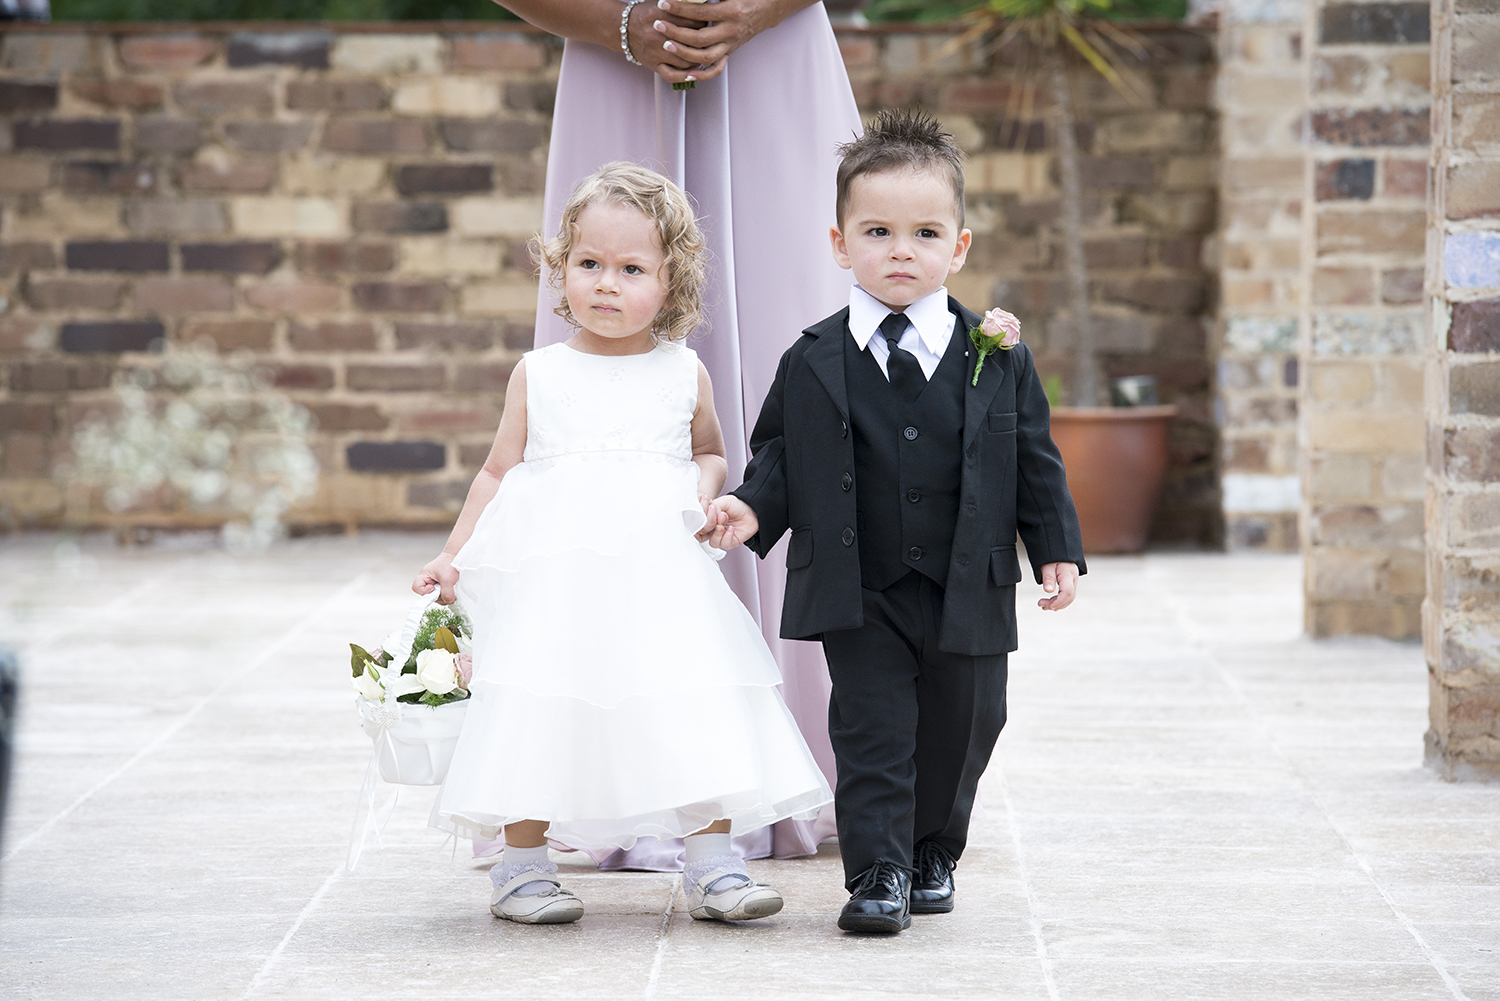 Flower girl and Page boy